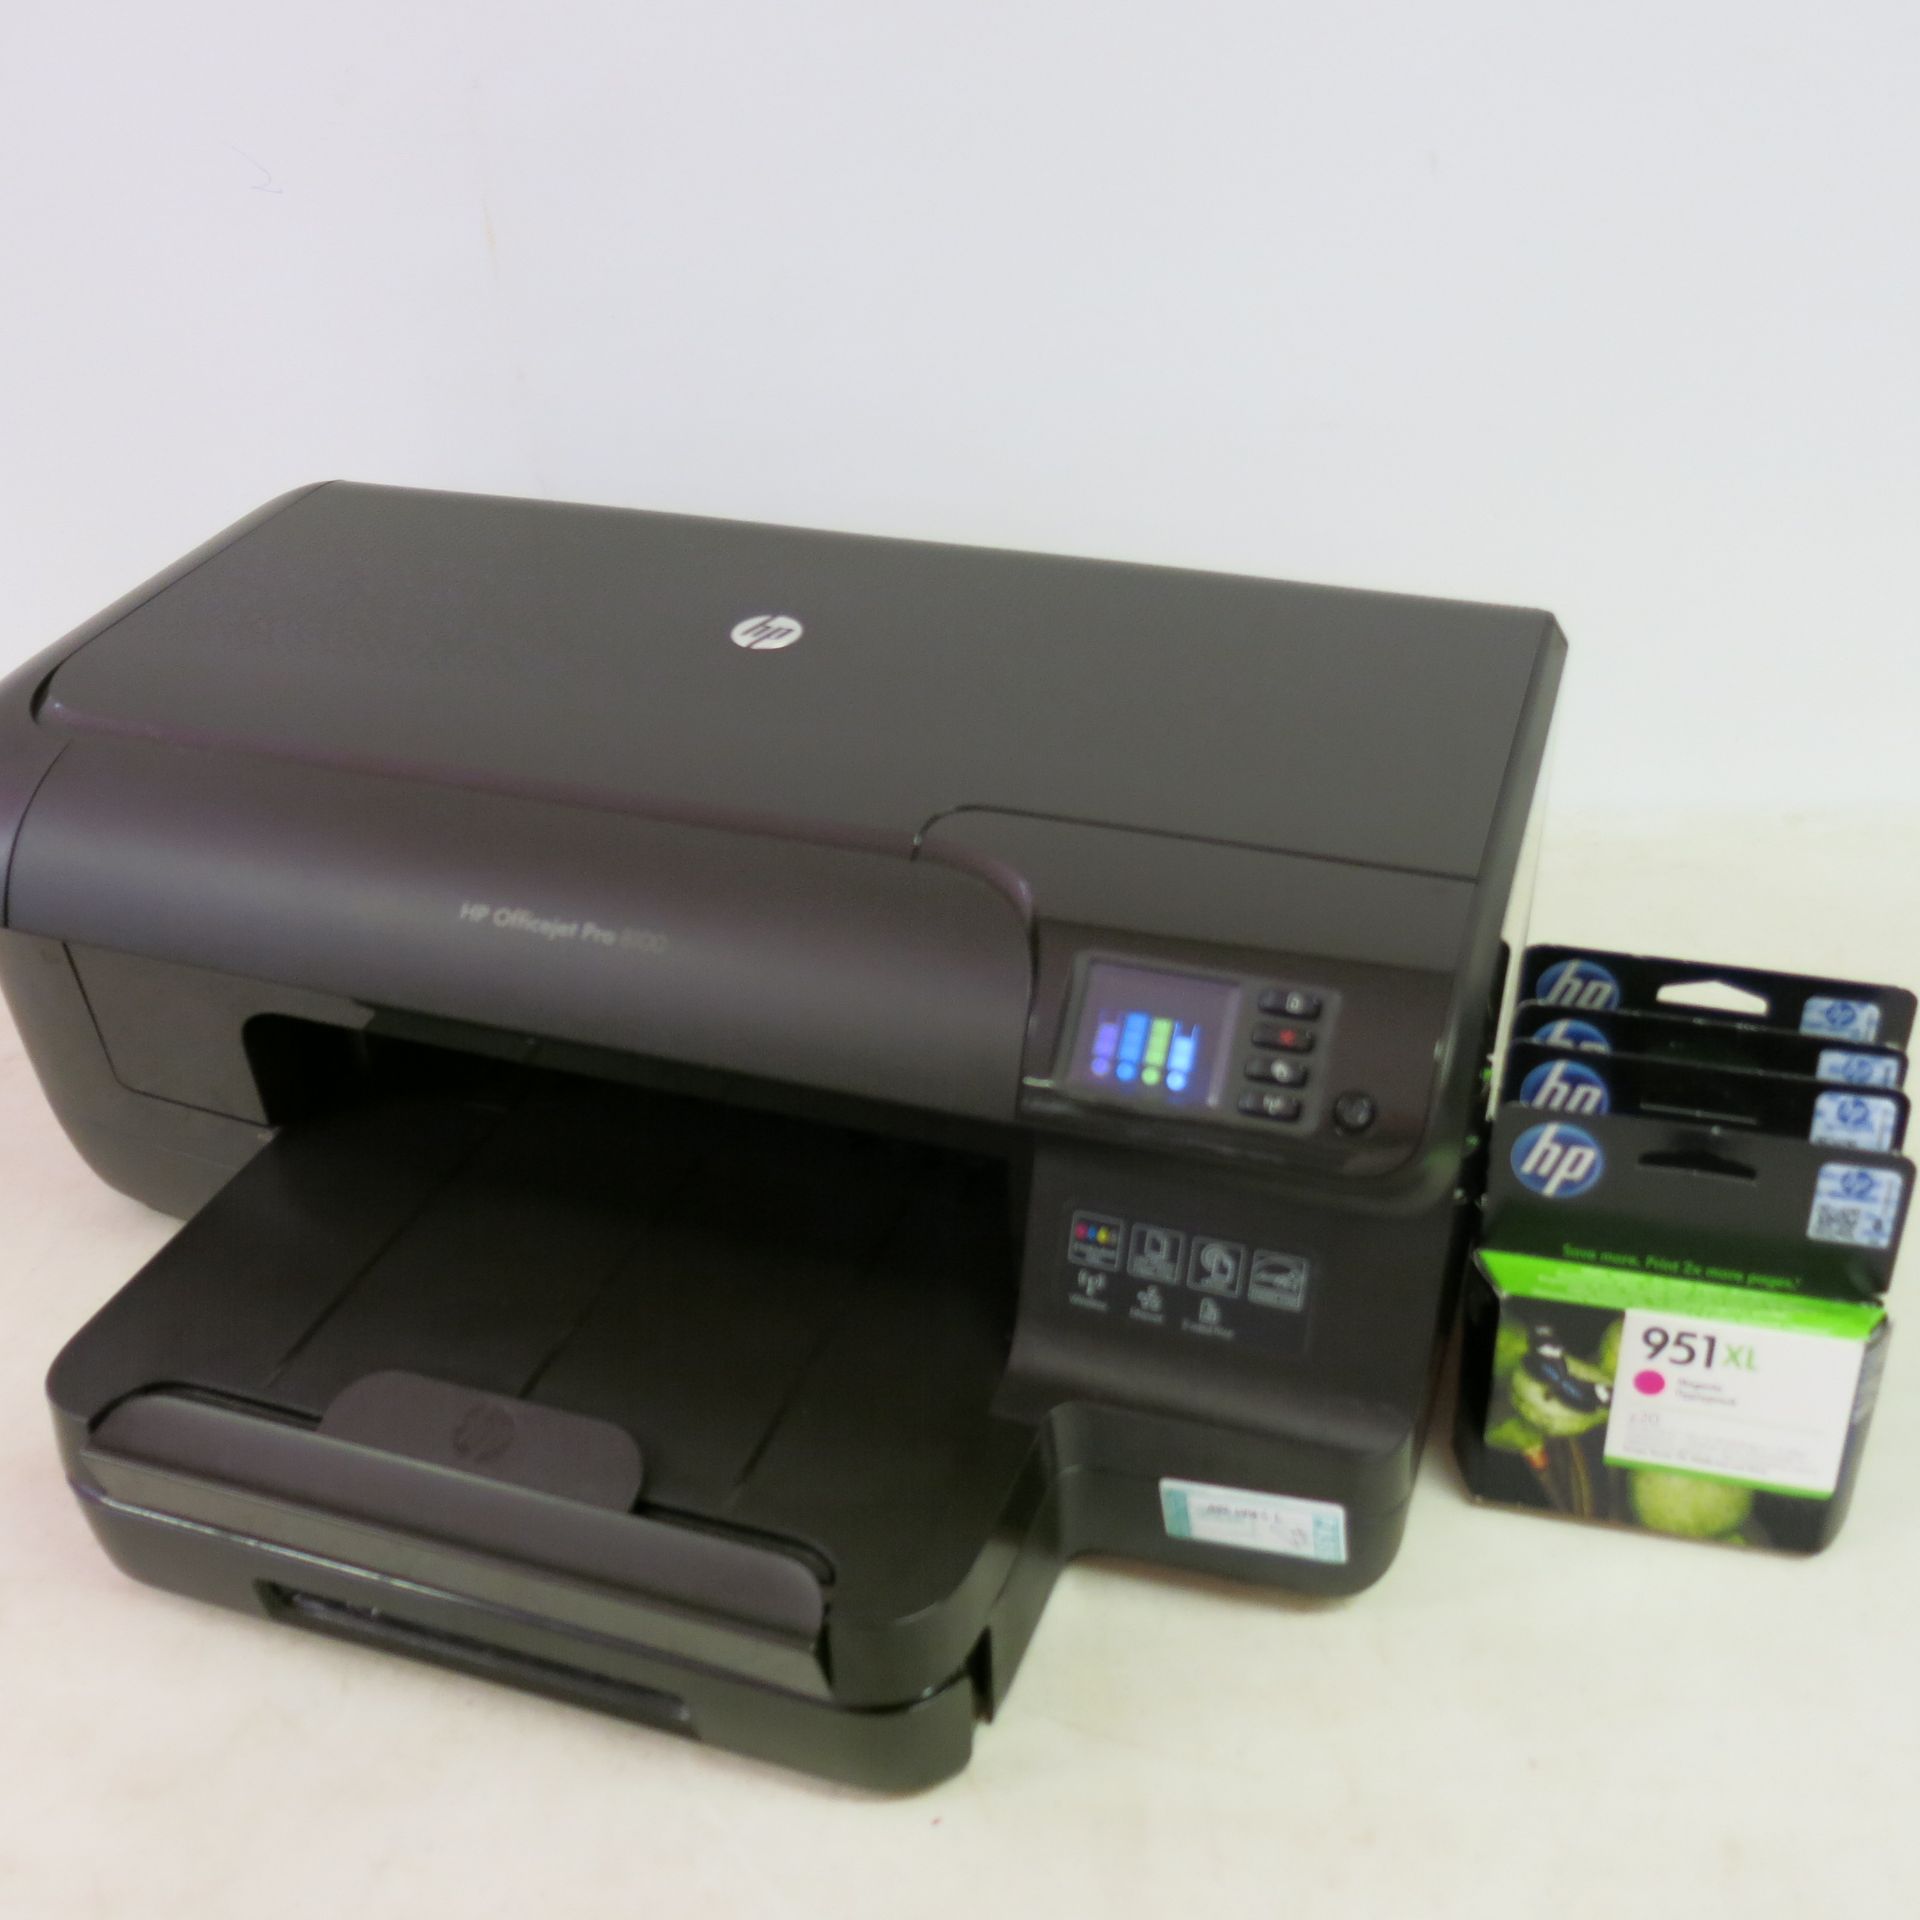 HP OfficeJet Pro 8100 with Power Supply. Comes with Complete Set of Ink Cartridges - Image 3 of 3